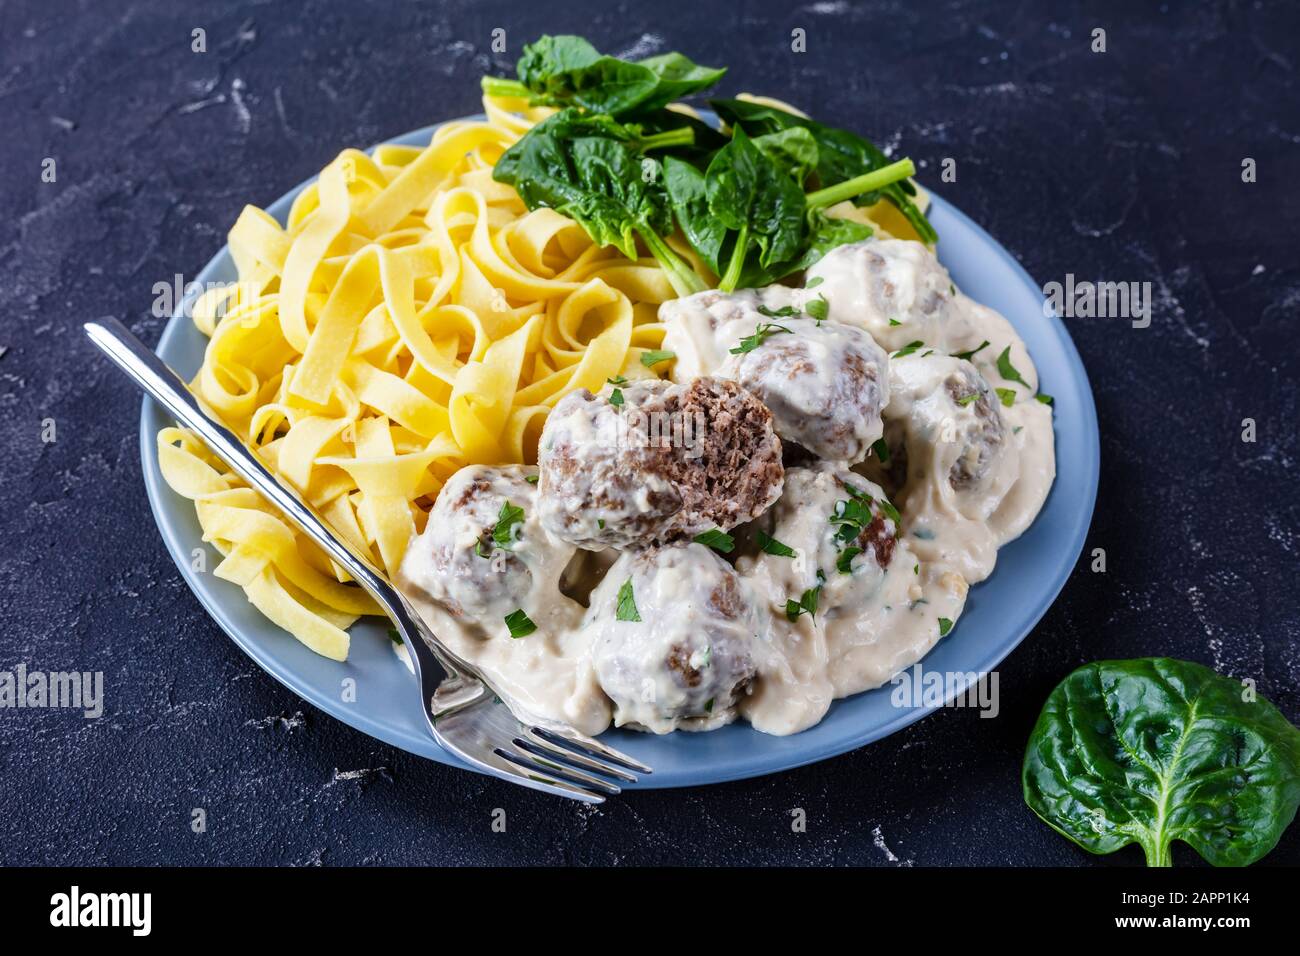 classic Swedish meatballs served with egg noodle and fresh spinach leaves on a plate on a concrete kitchen table, view from above, close-up Stock Photo